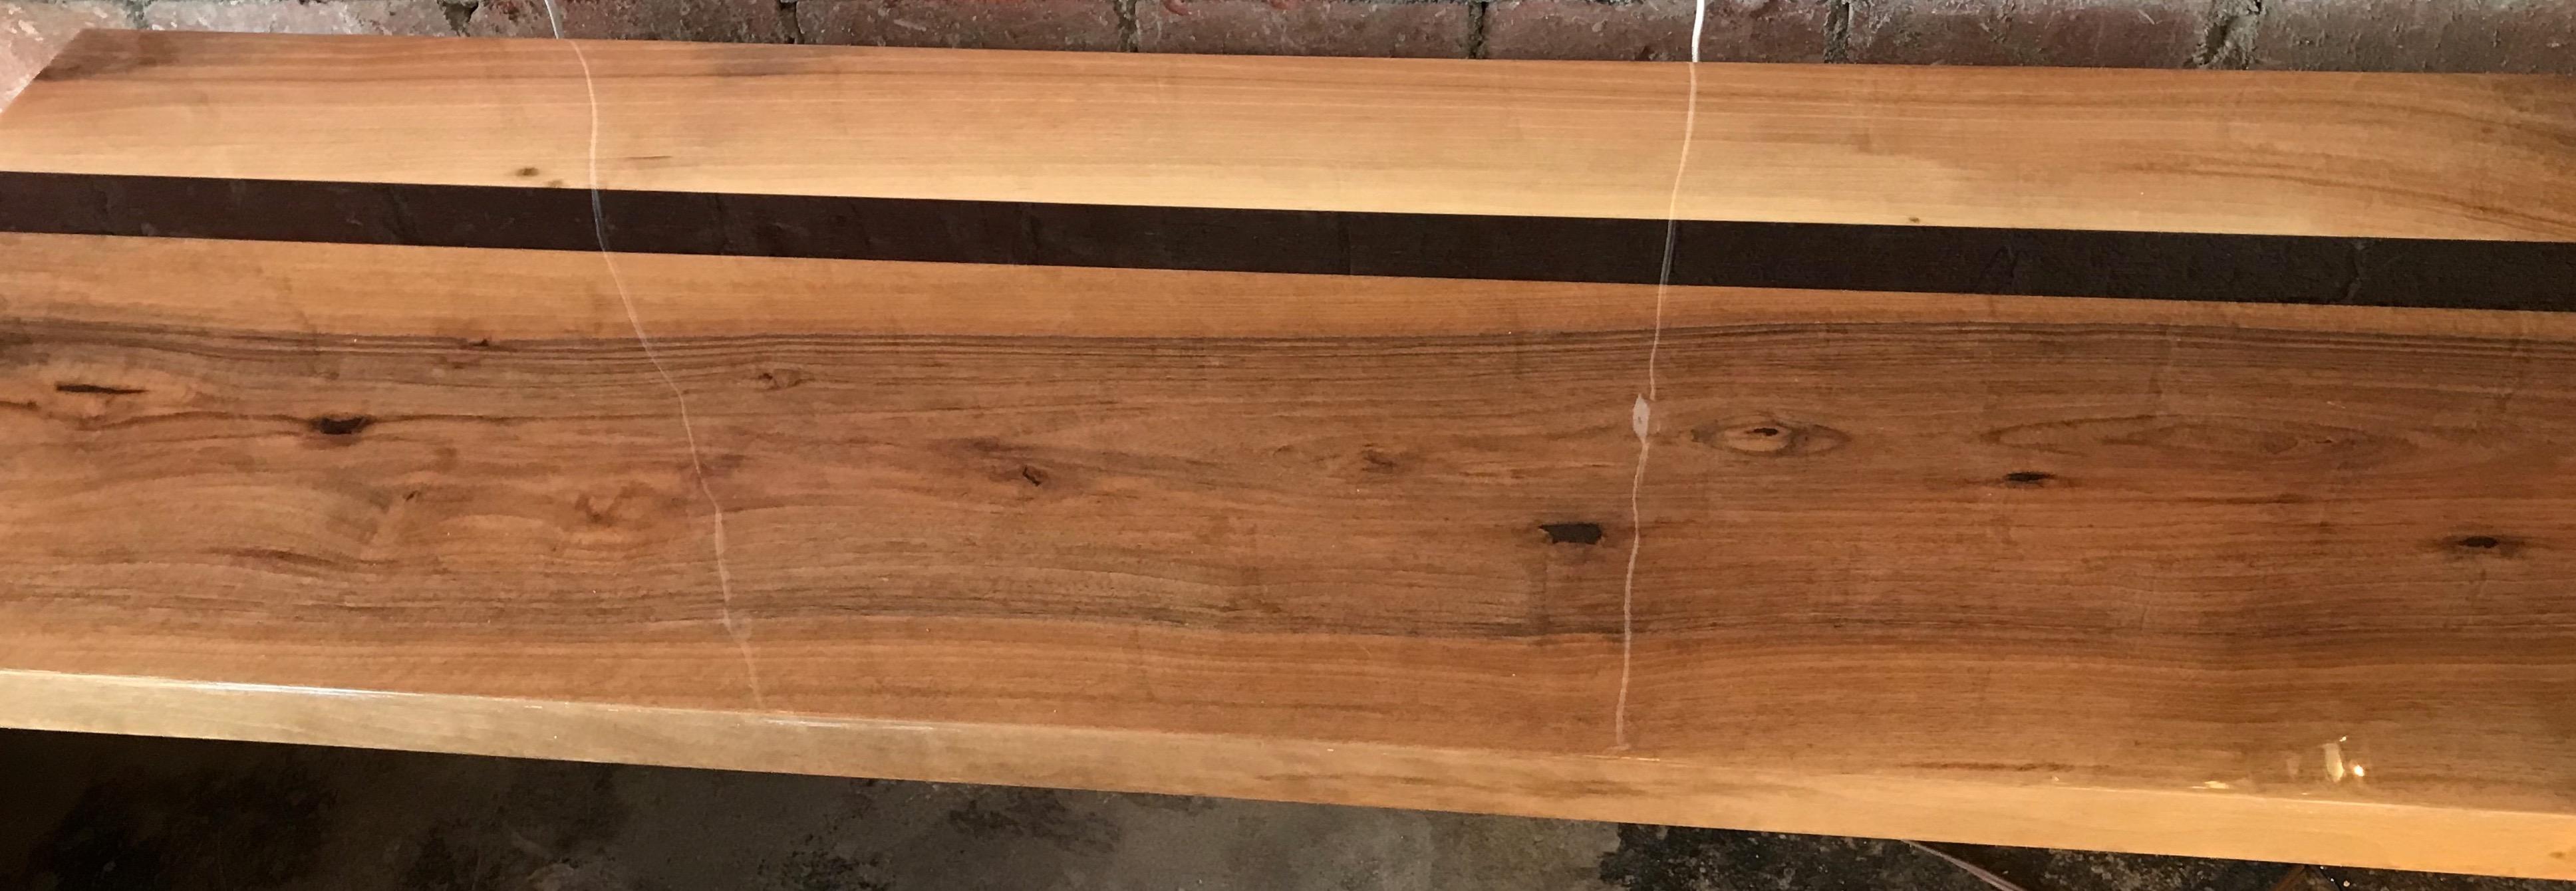 Italian Minimalist Monolithic Oak Bench In Excellent Condition For Sale In Los Angeles, CA